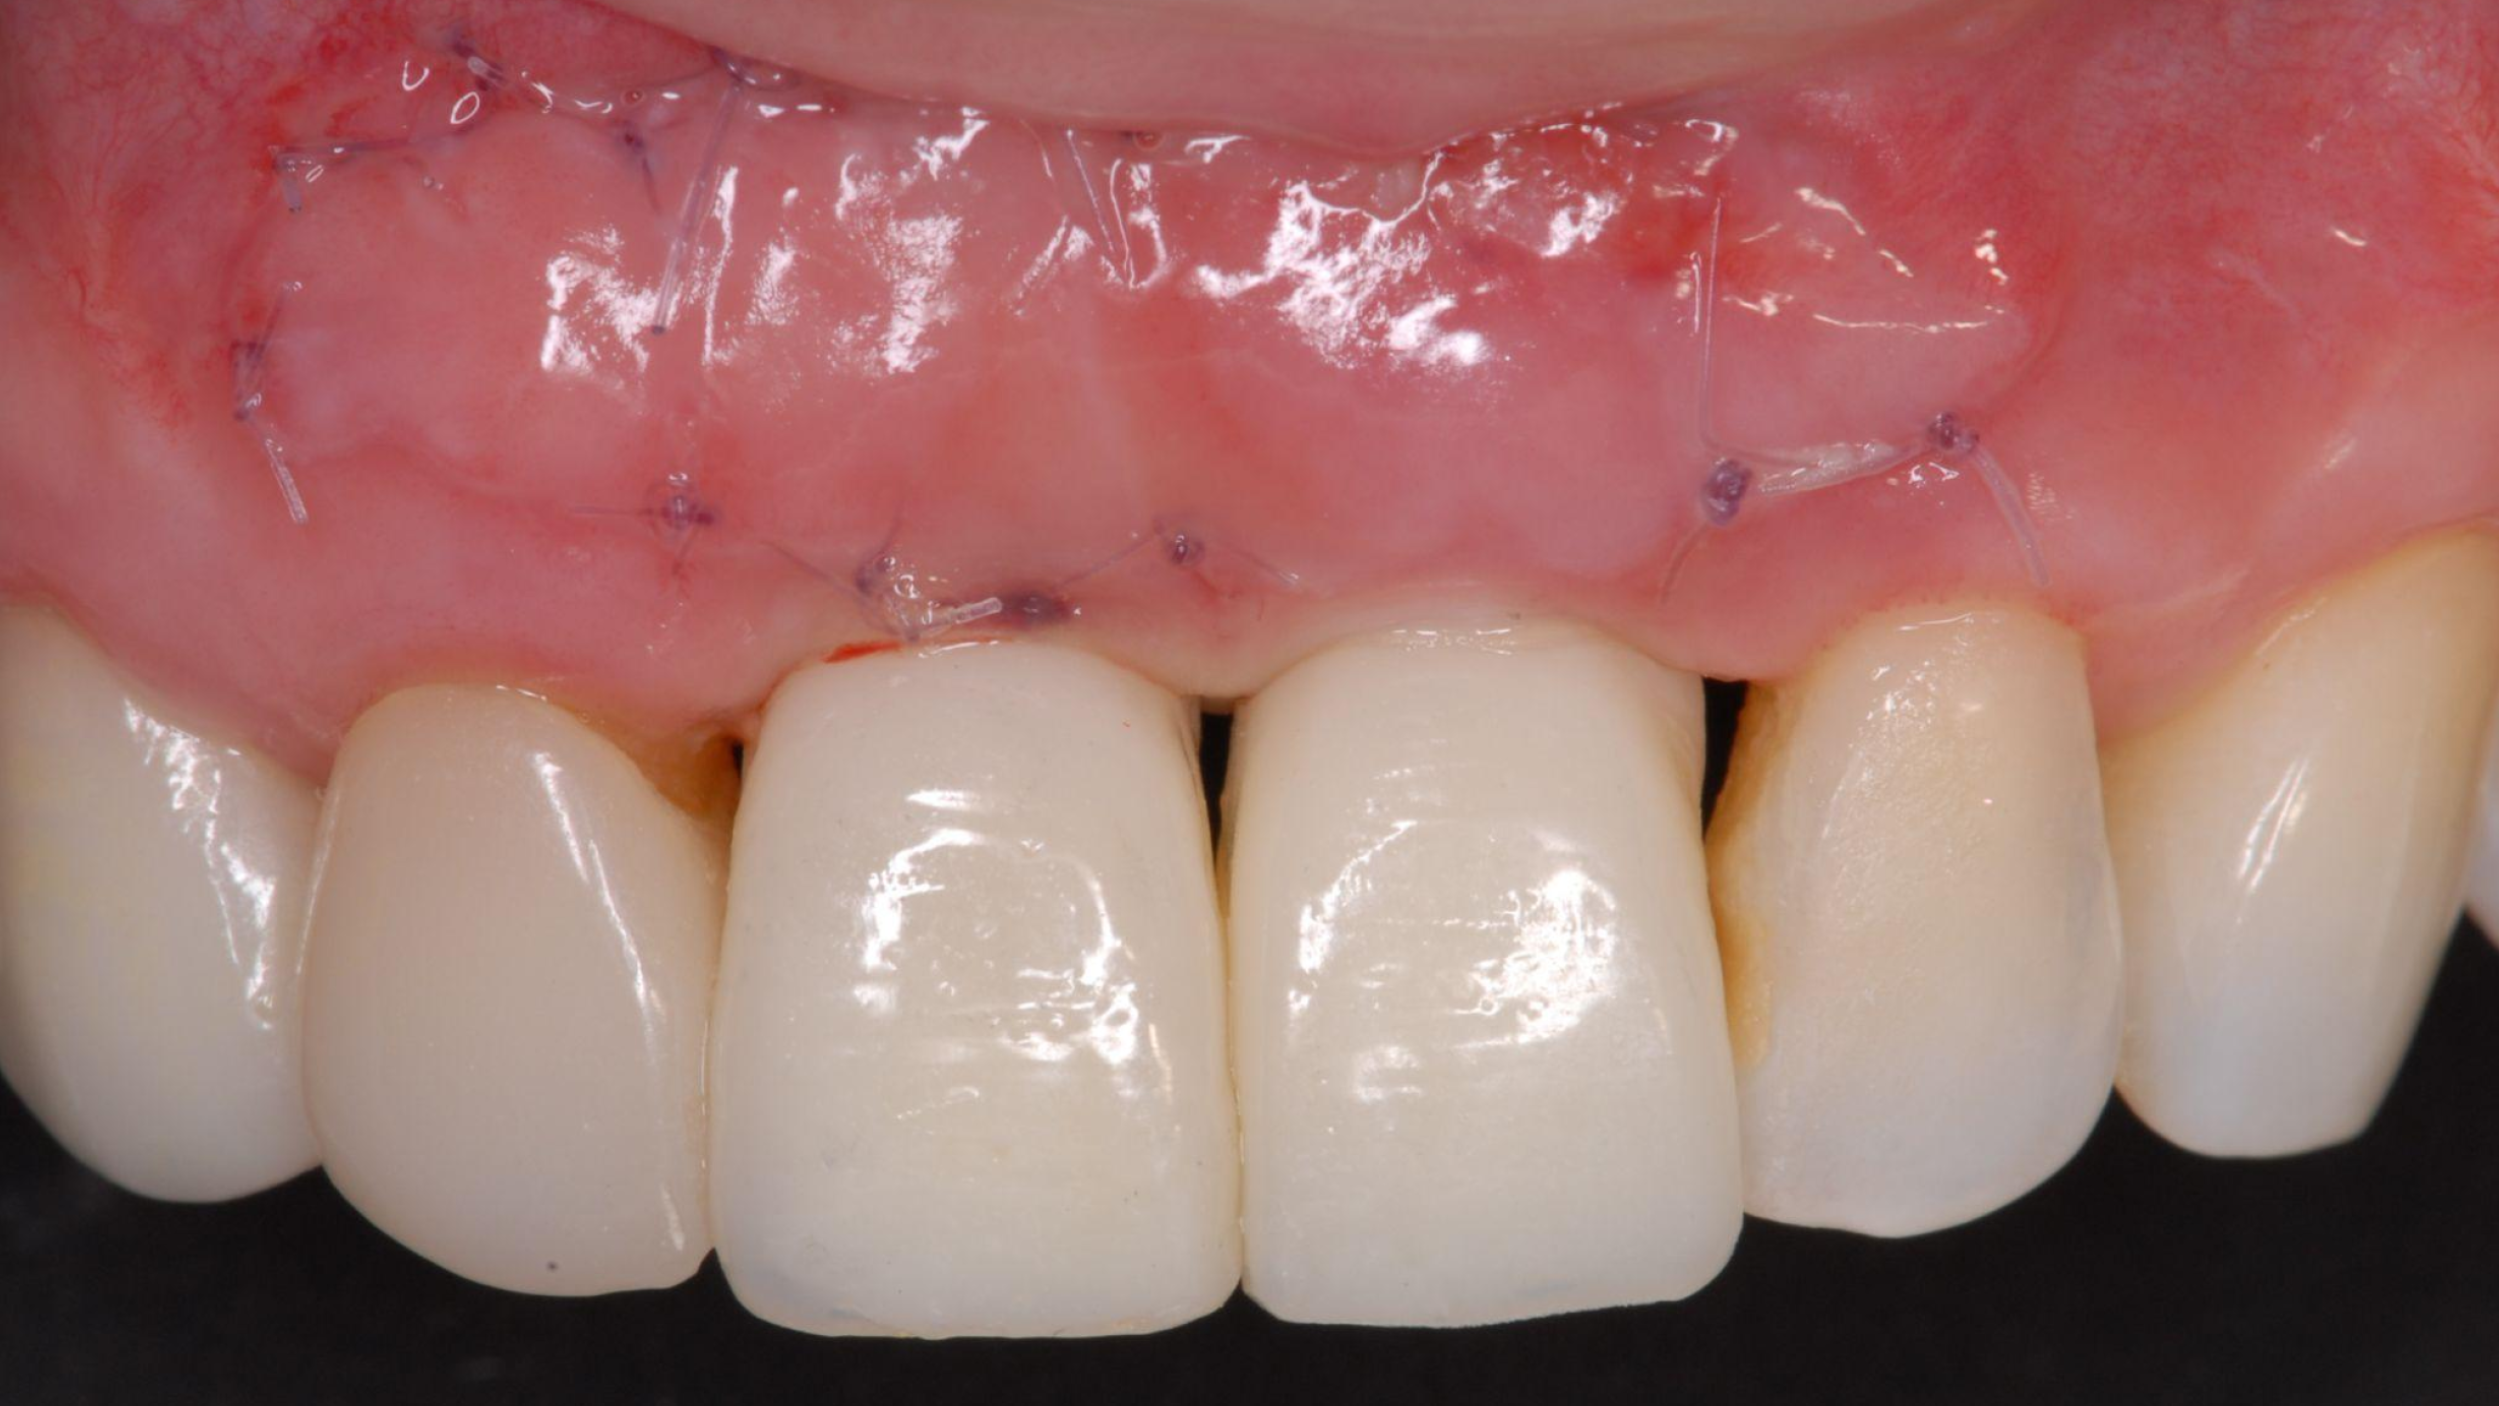 Uncovering and Temporization of 2 Anterior Implants with Mucogingival Surgery for Optimal Soft Tissue Healing